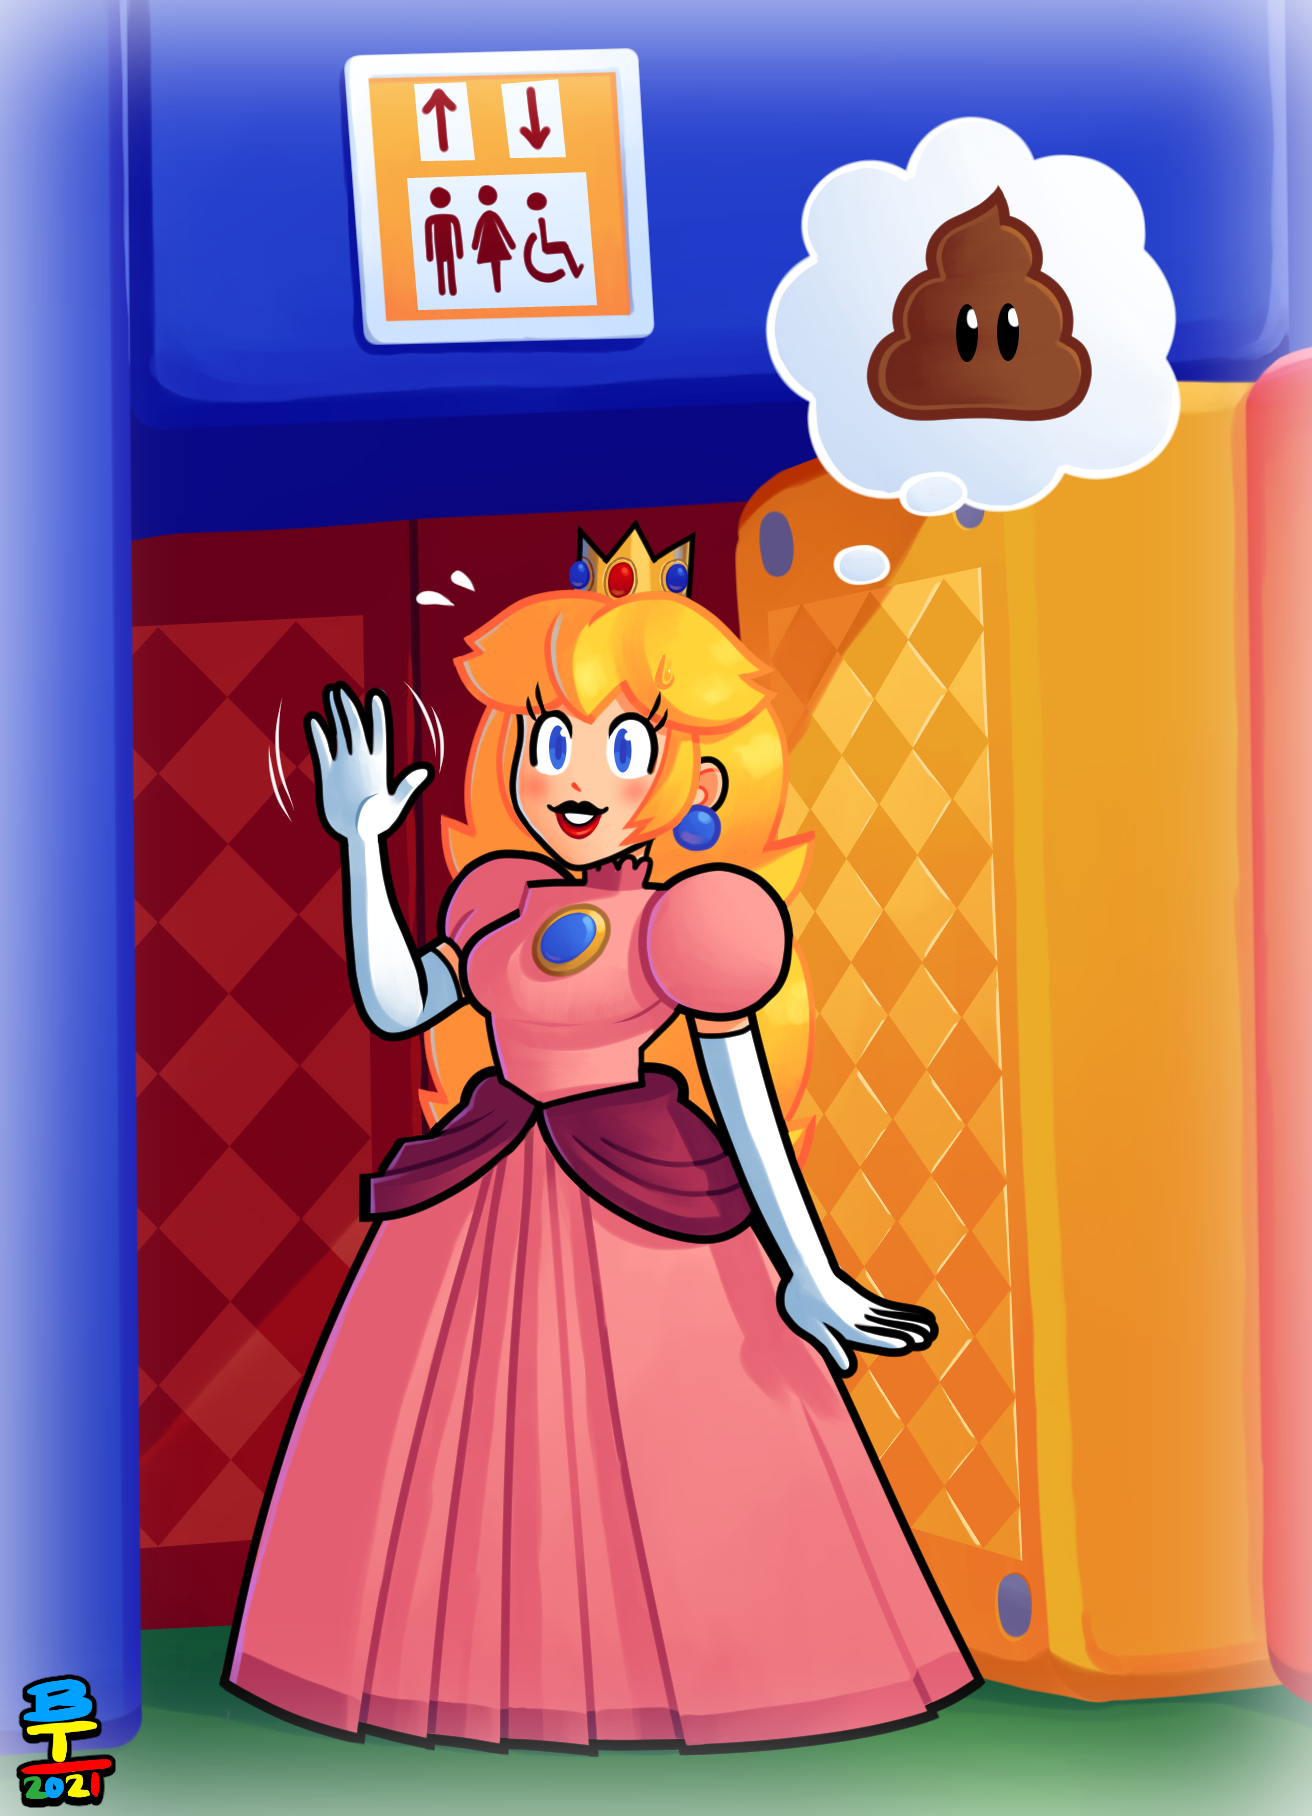 Peachy By Wazzaldorp On Deviantart